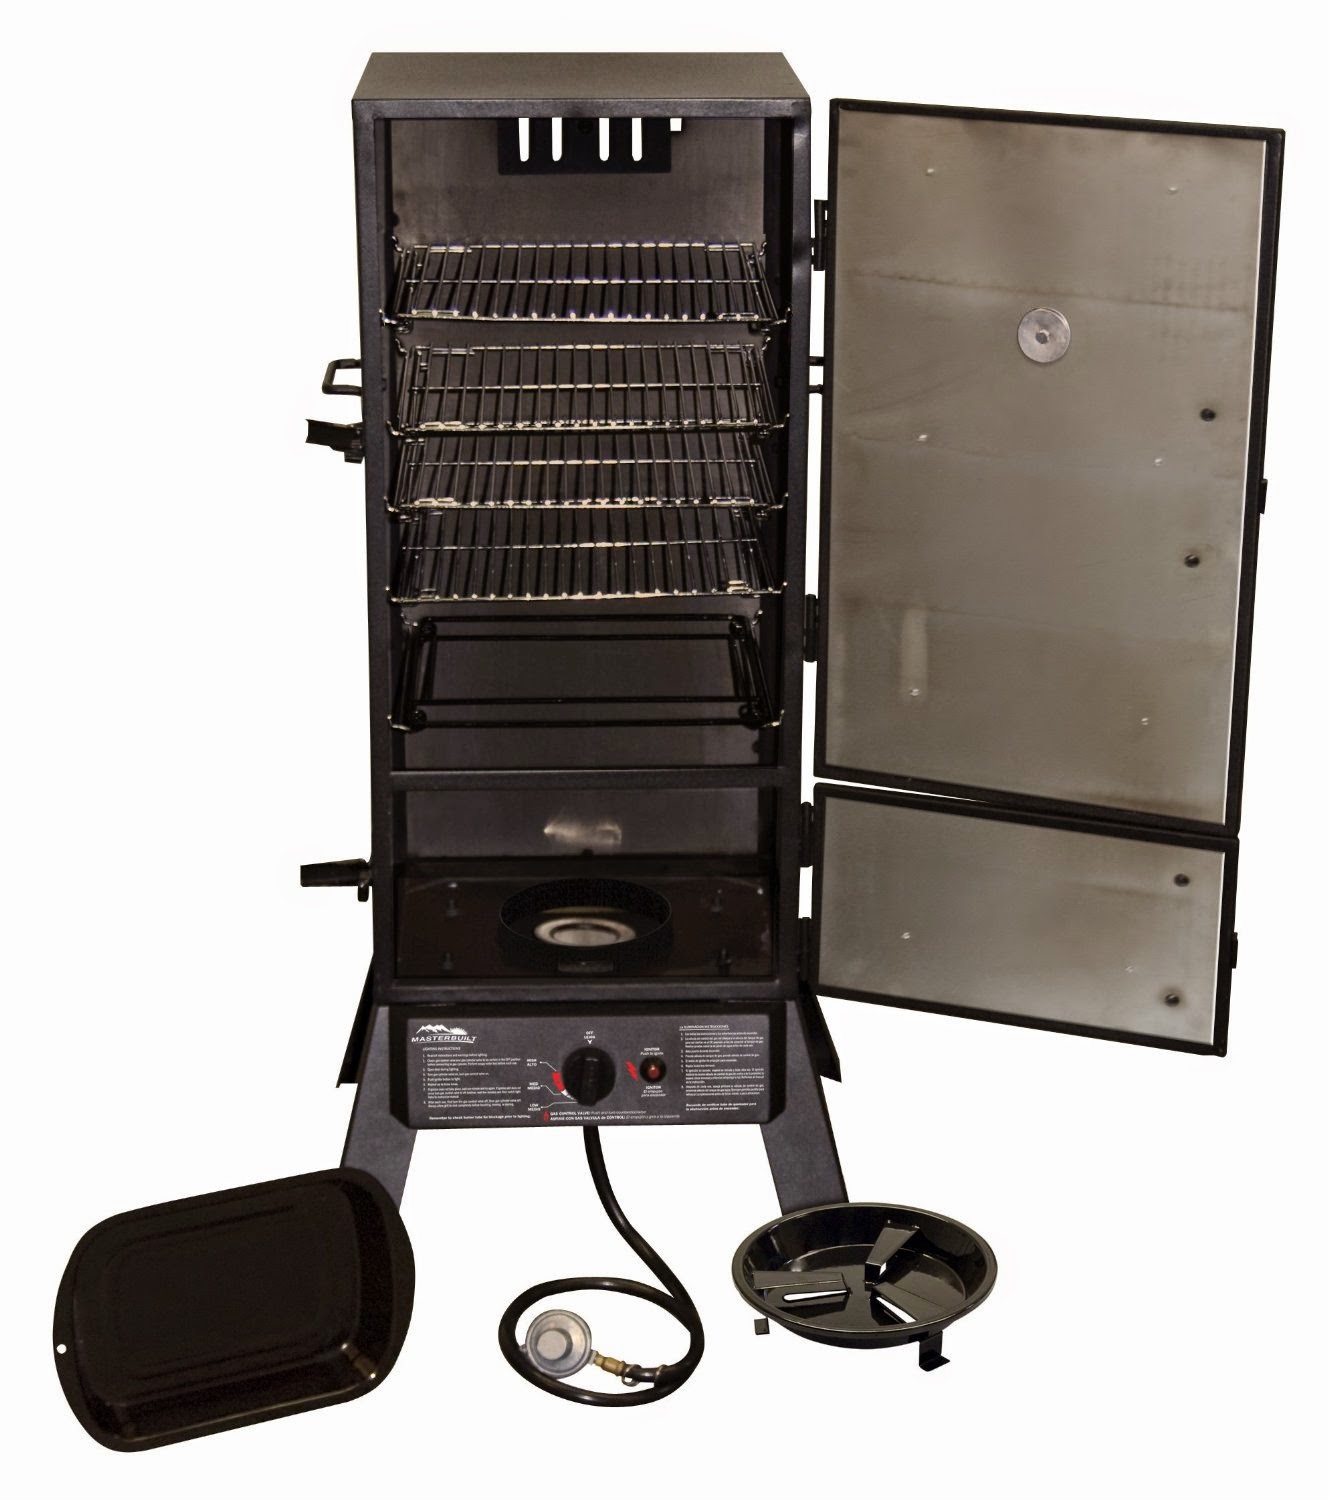 Masterbuilt gas smoker, inside view, 2 doors, adjustable shelves, 717 square inch cooking space